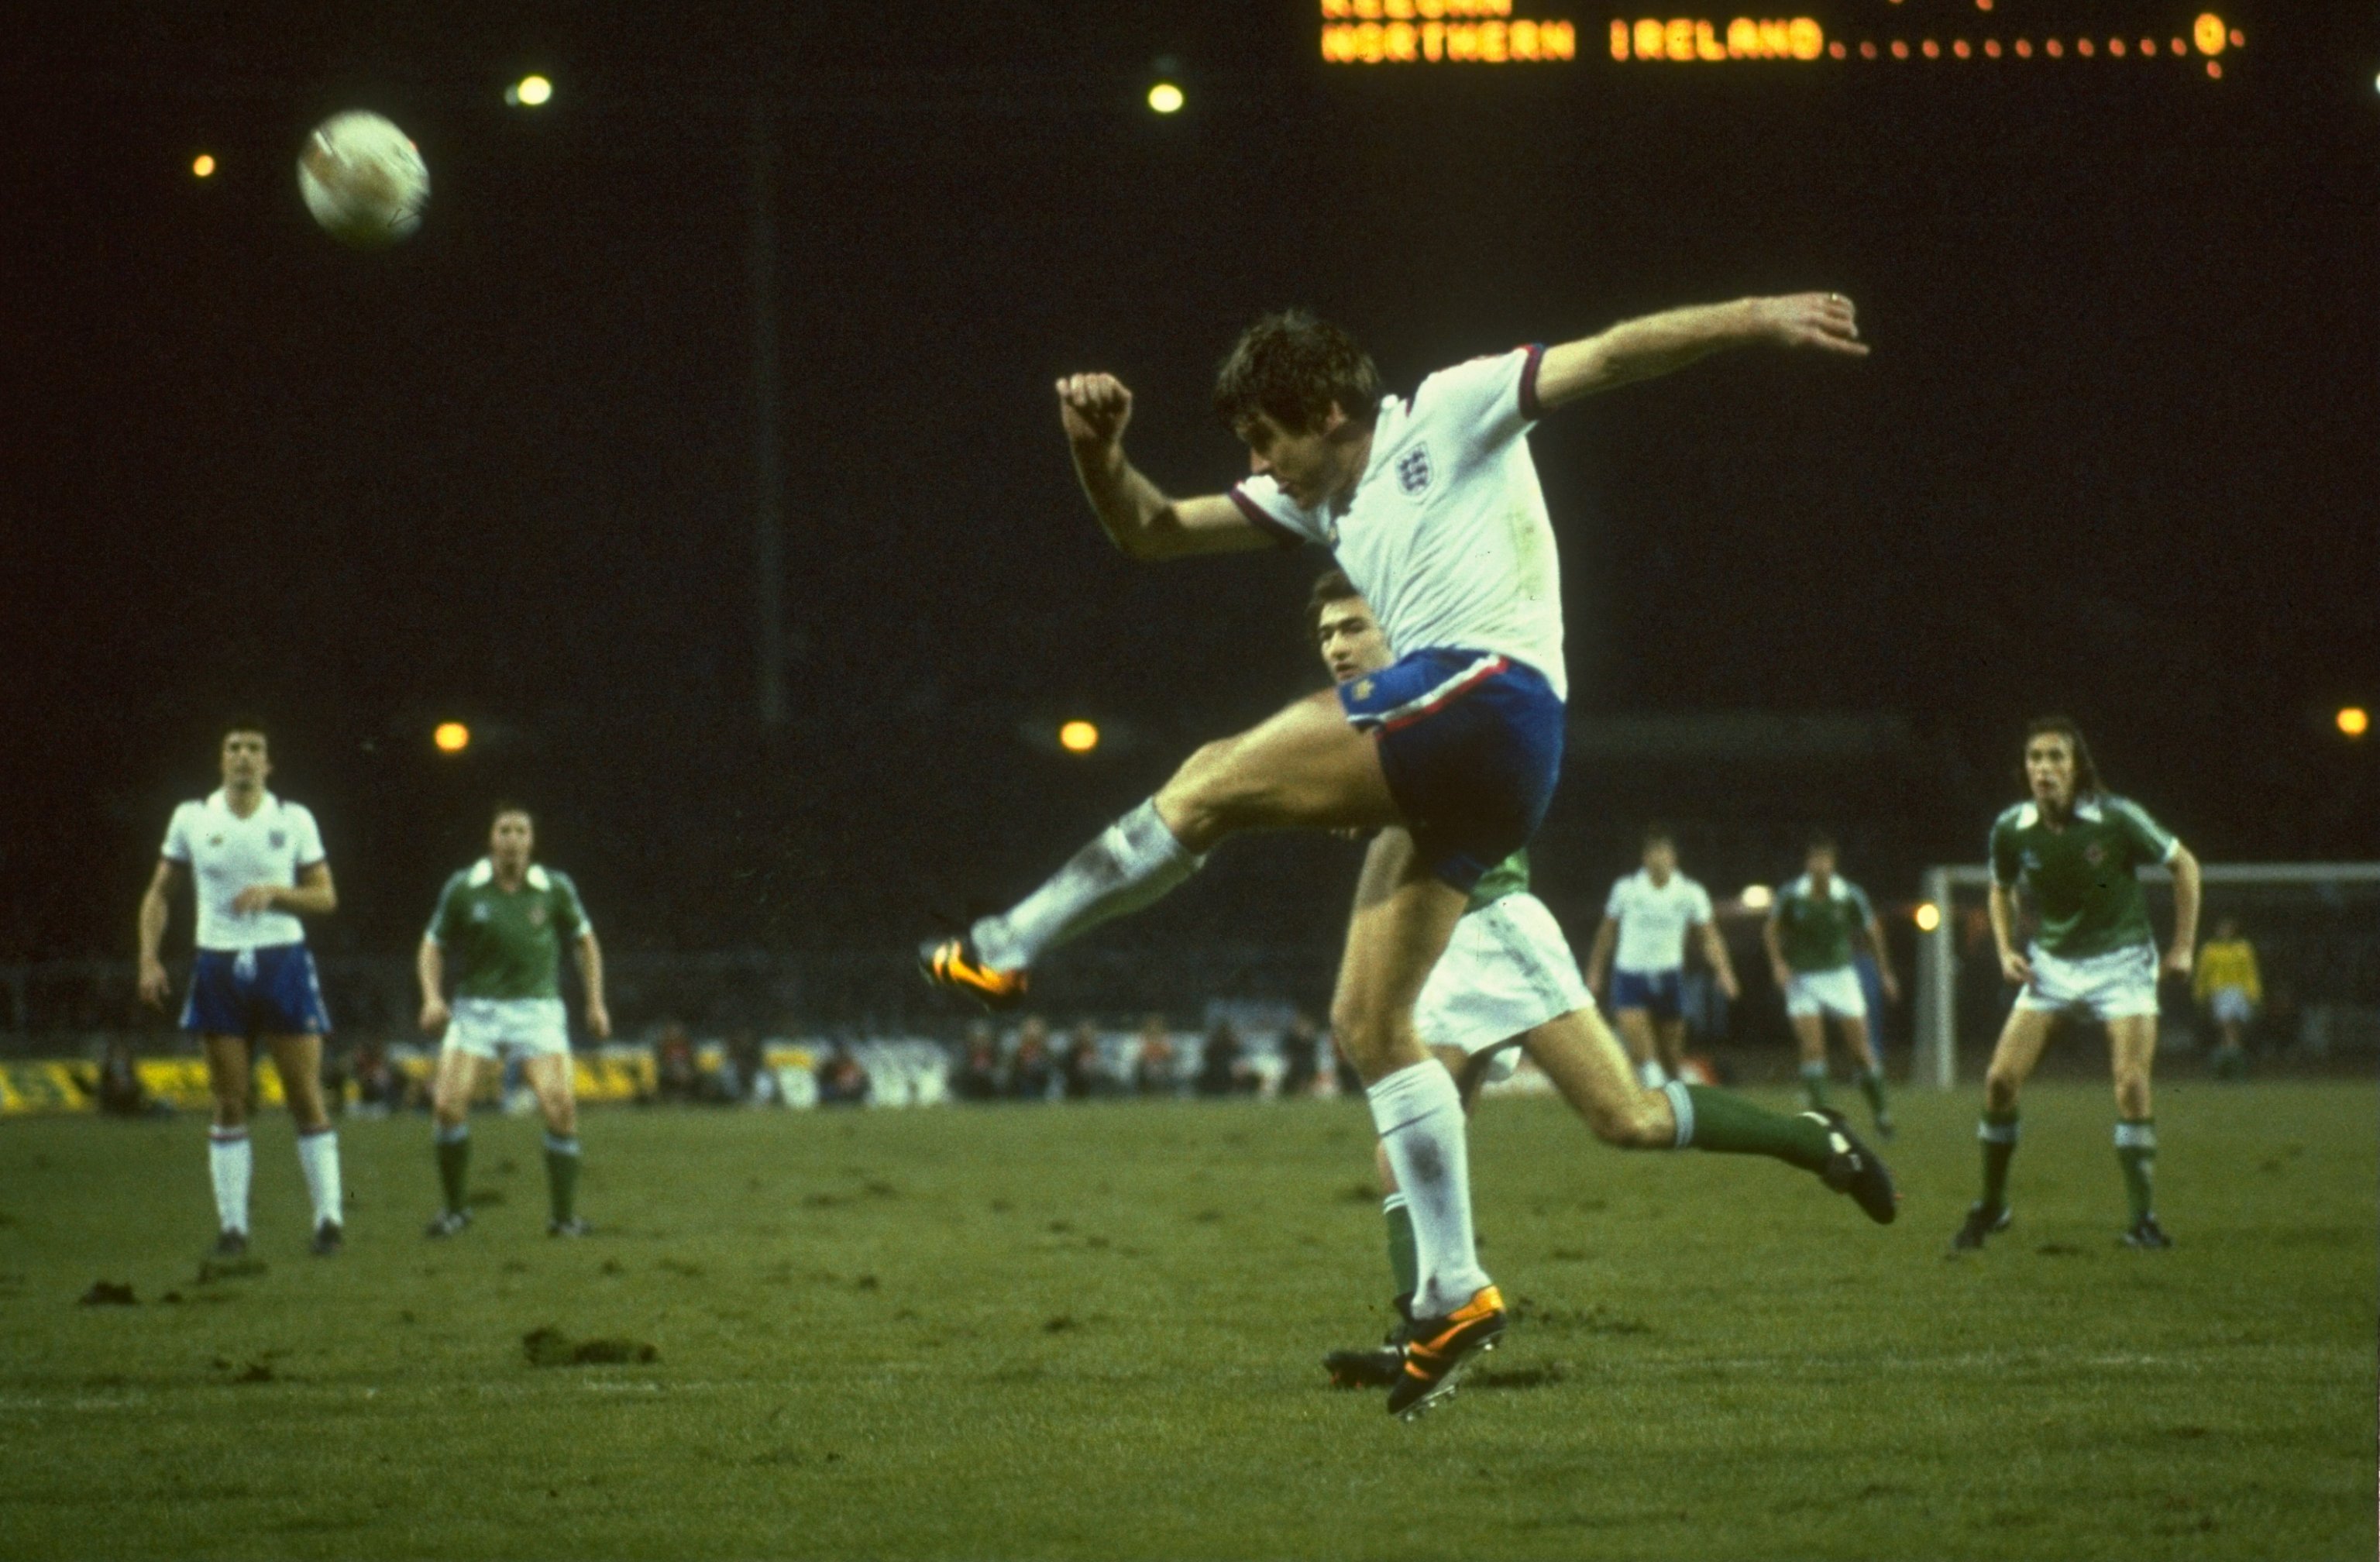 1970:  Emlyn Hughes (centre) of England clears the ball as Martin O''Neil (centre right) of Northern Ireland looks on during the match at Wembley, London. \ Mandatory Credit: Allsport UK /Allsport